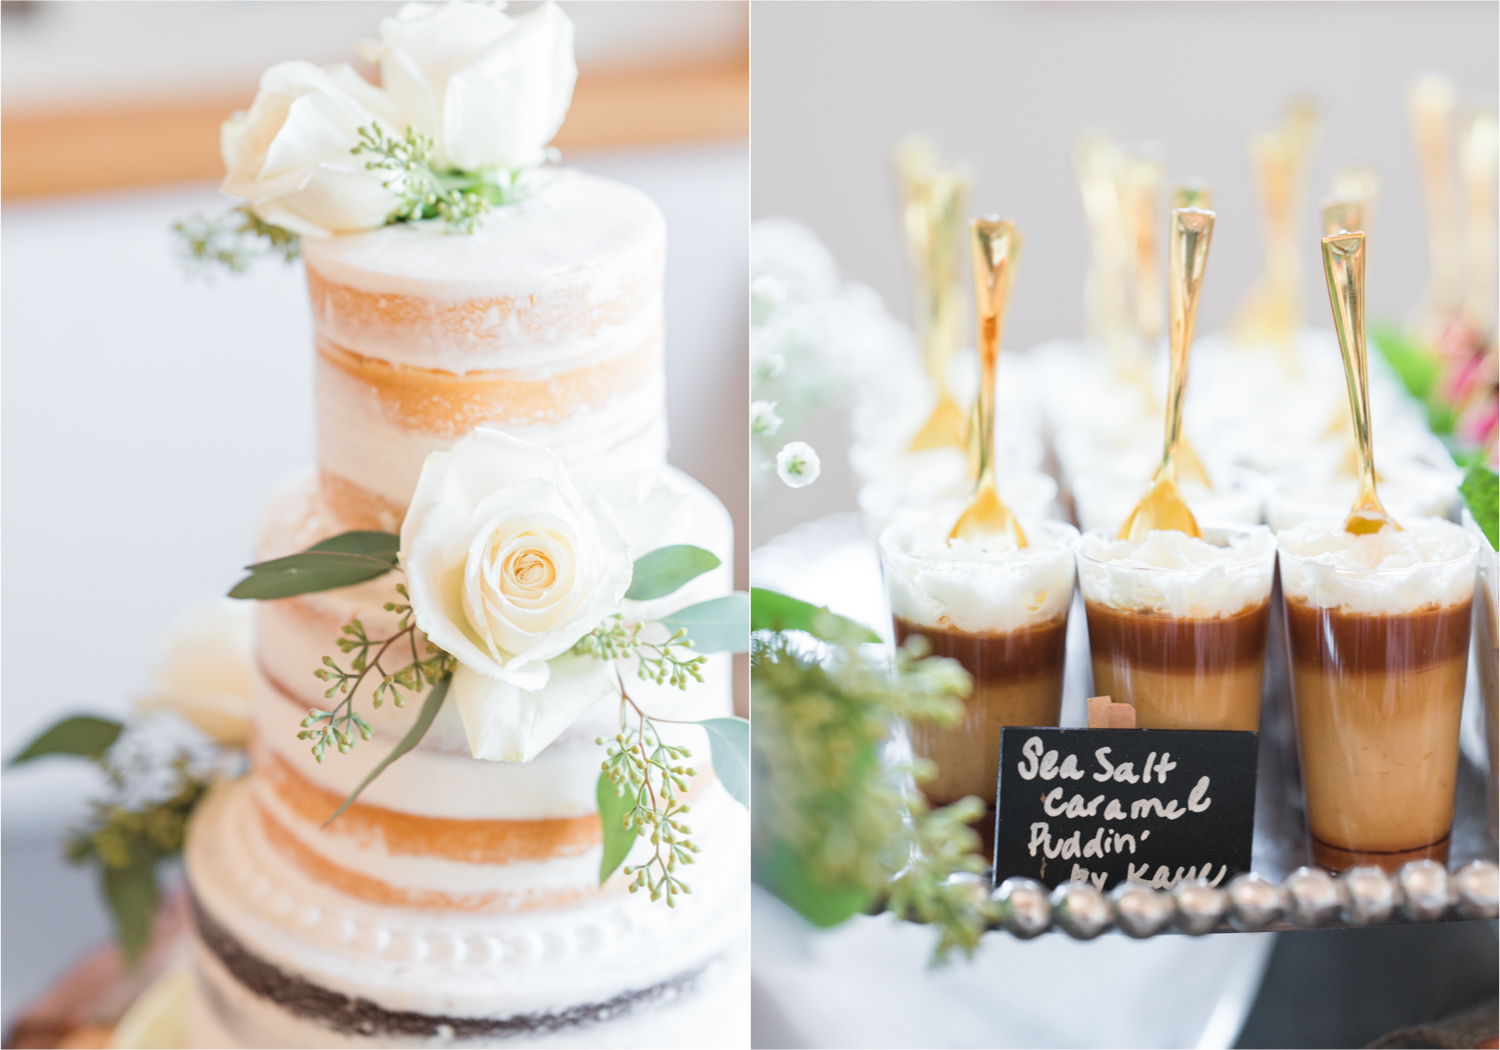 Autumn mountain wedding in Florence Colorado | Britni Girard Photography | Colorado Wedding Photo and Video Team | Mountainside Cabin for intimate wedding with rustic farm-tables and romantic details | 3 tiered cake by Sugar Plum Cake Shoppe, Sea Salt Caramel Puddin' Cups